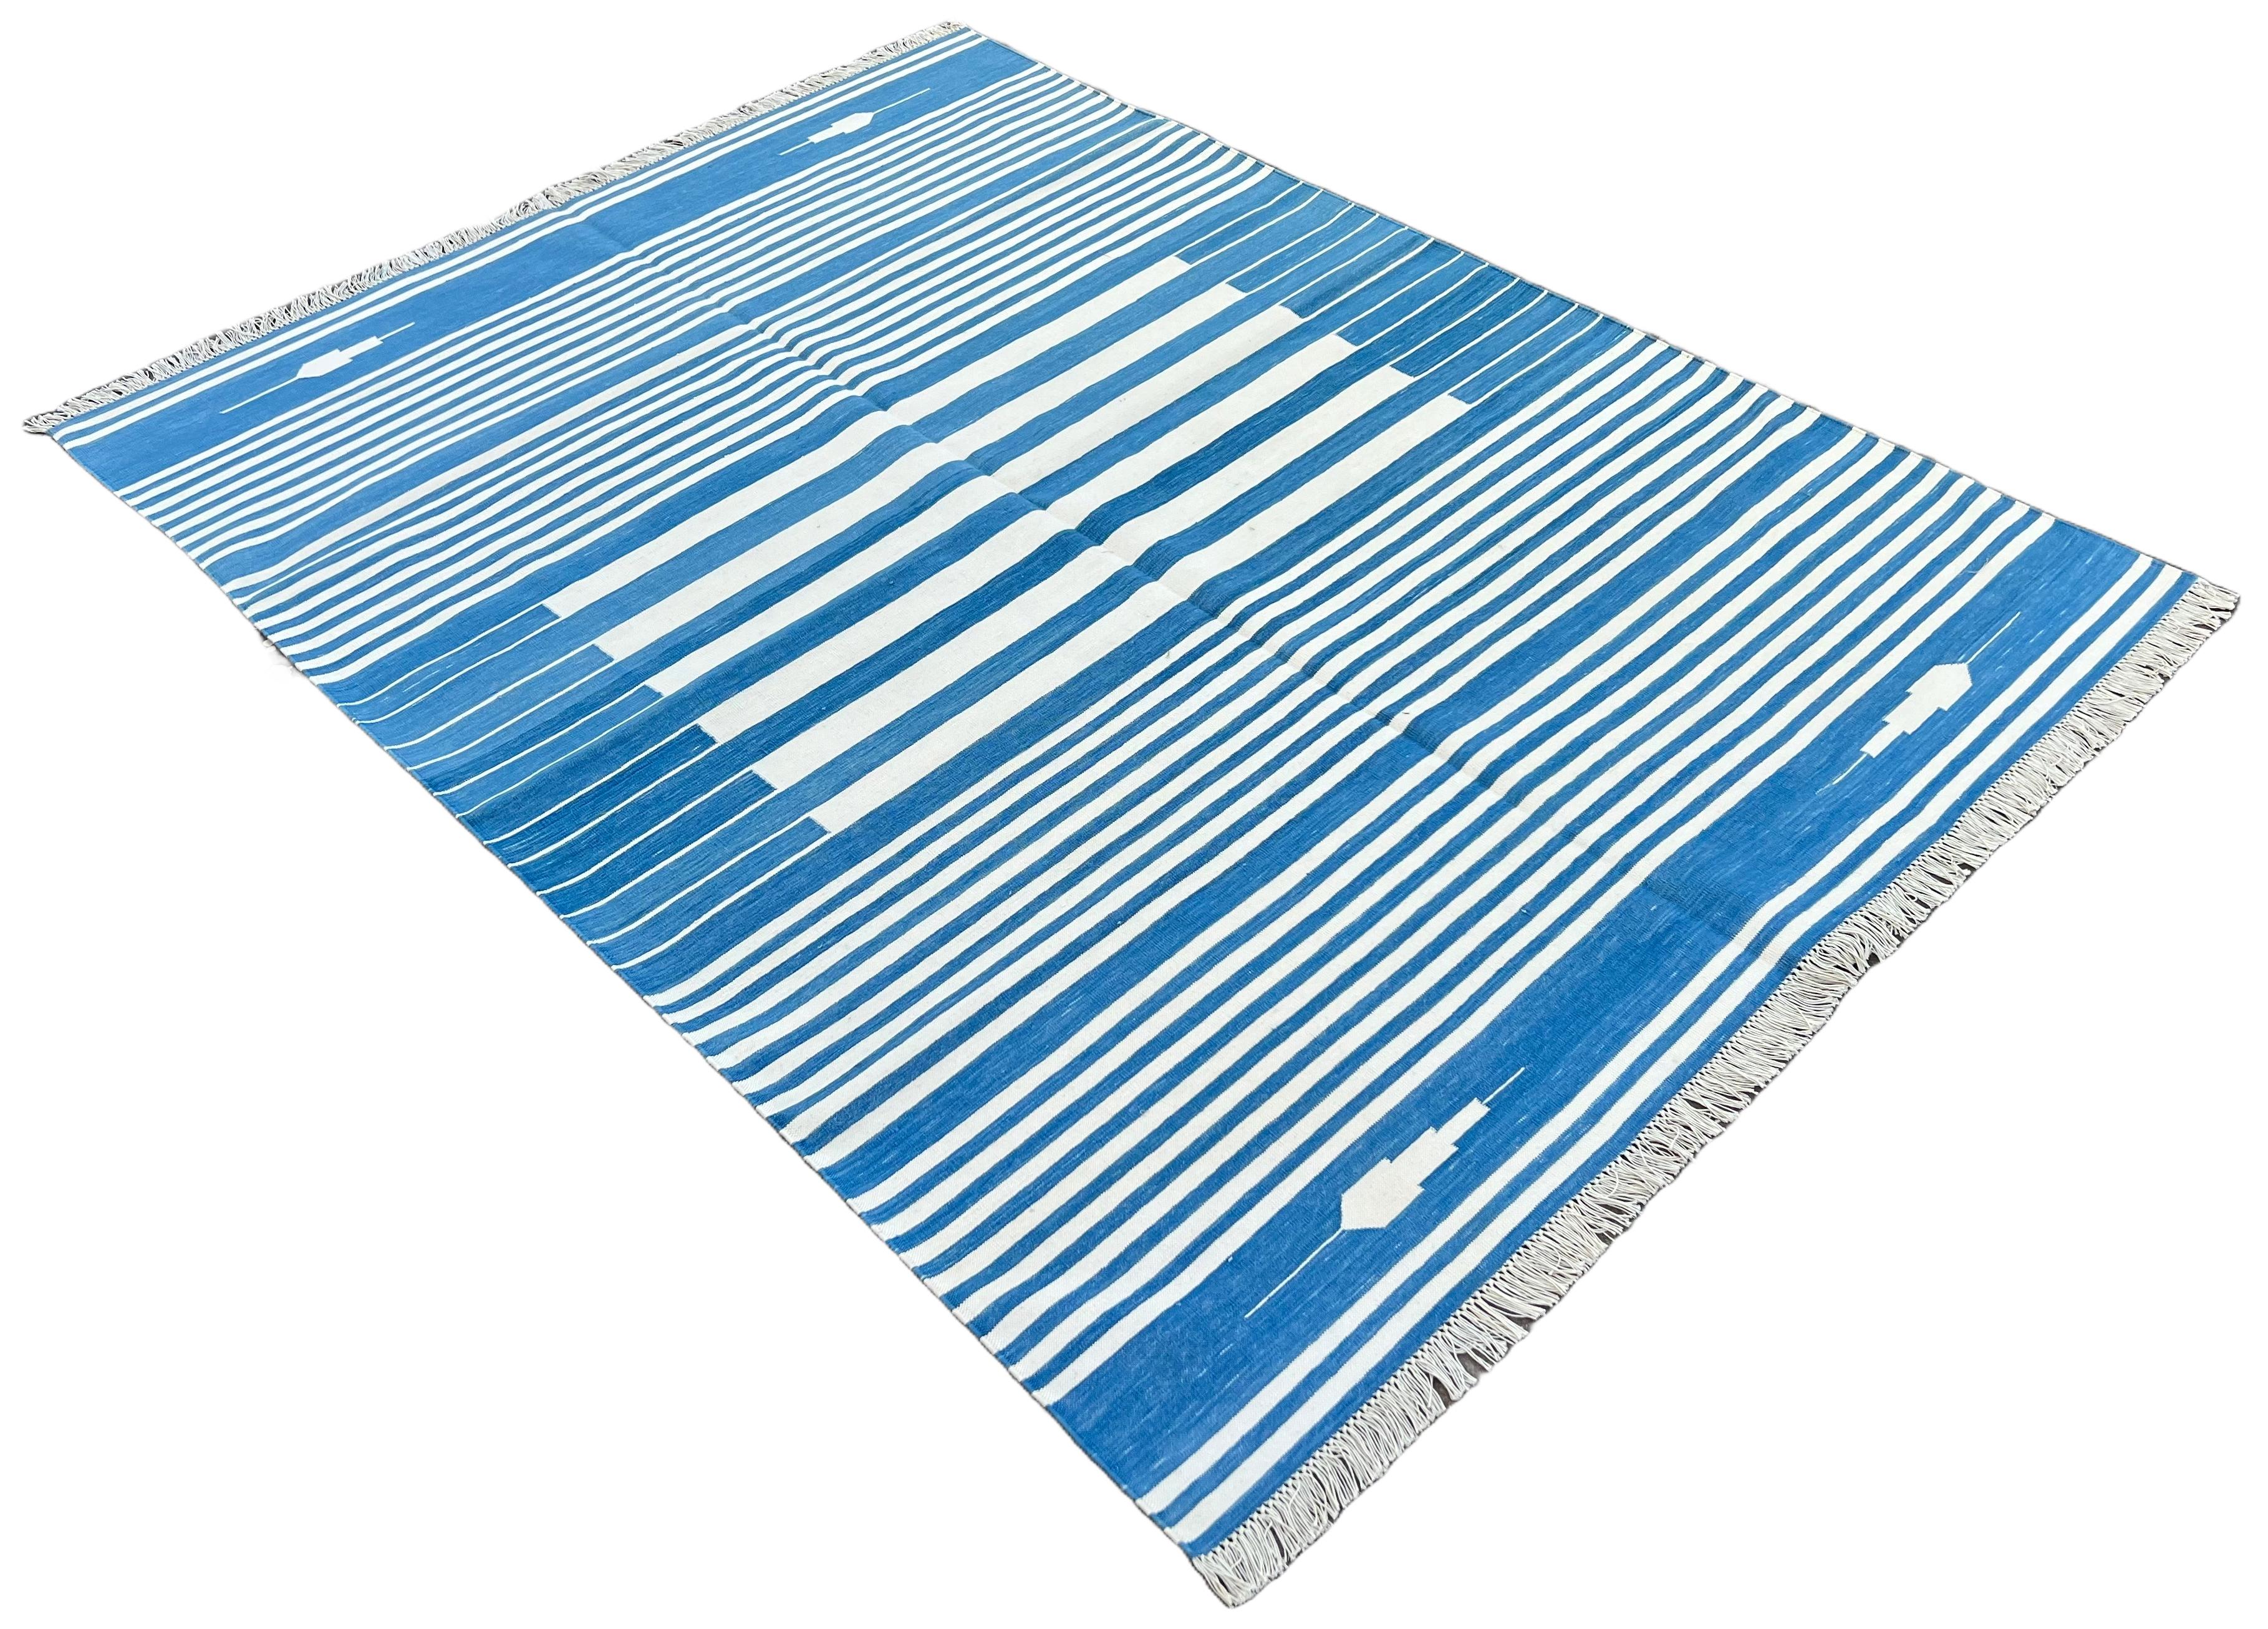 Cotton Vegetable Dyed Sky Blue And White Striped Indian Dhurrie Rug-5'x7'

These special flat-weave dhurries are hand-woven with 15 ply 100% cotton yarn. Due to the special manufacturing techniques used to create our rugs, the size and color of each